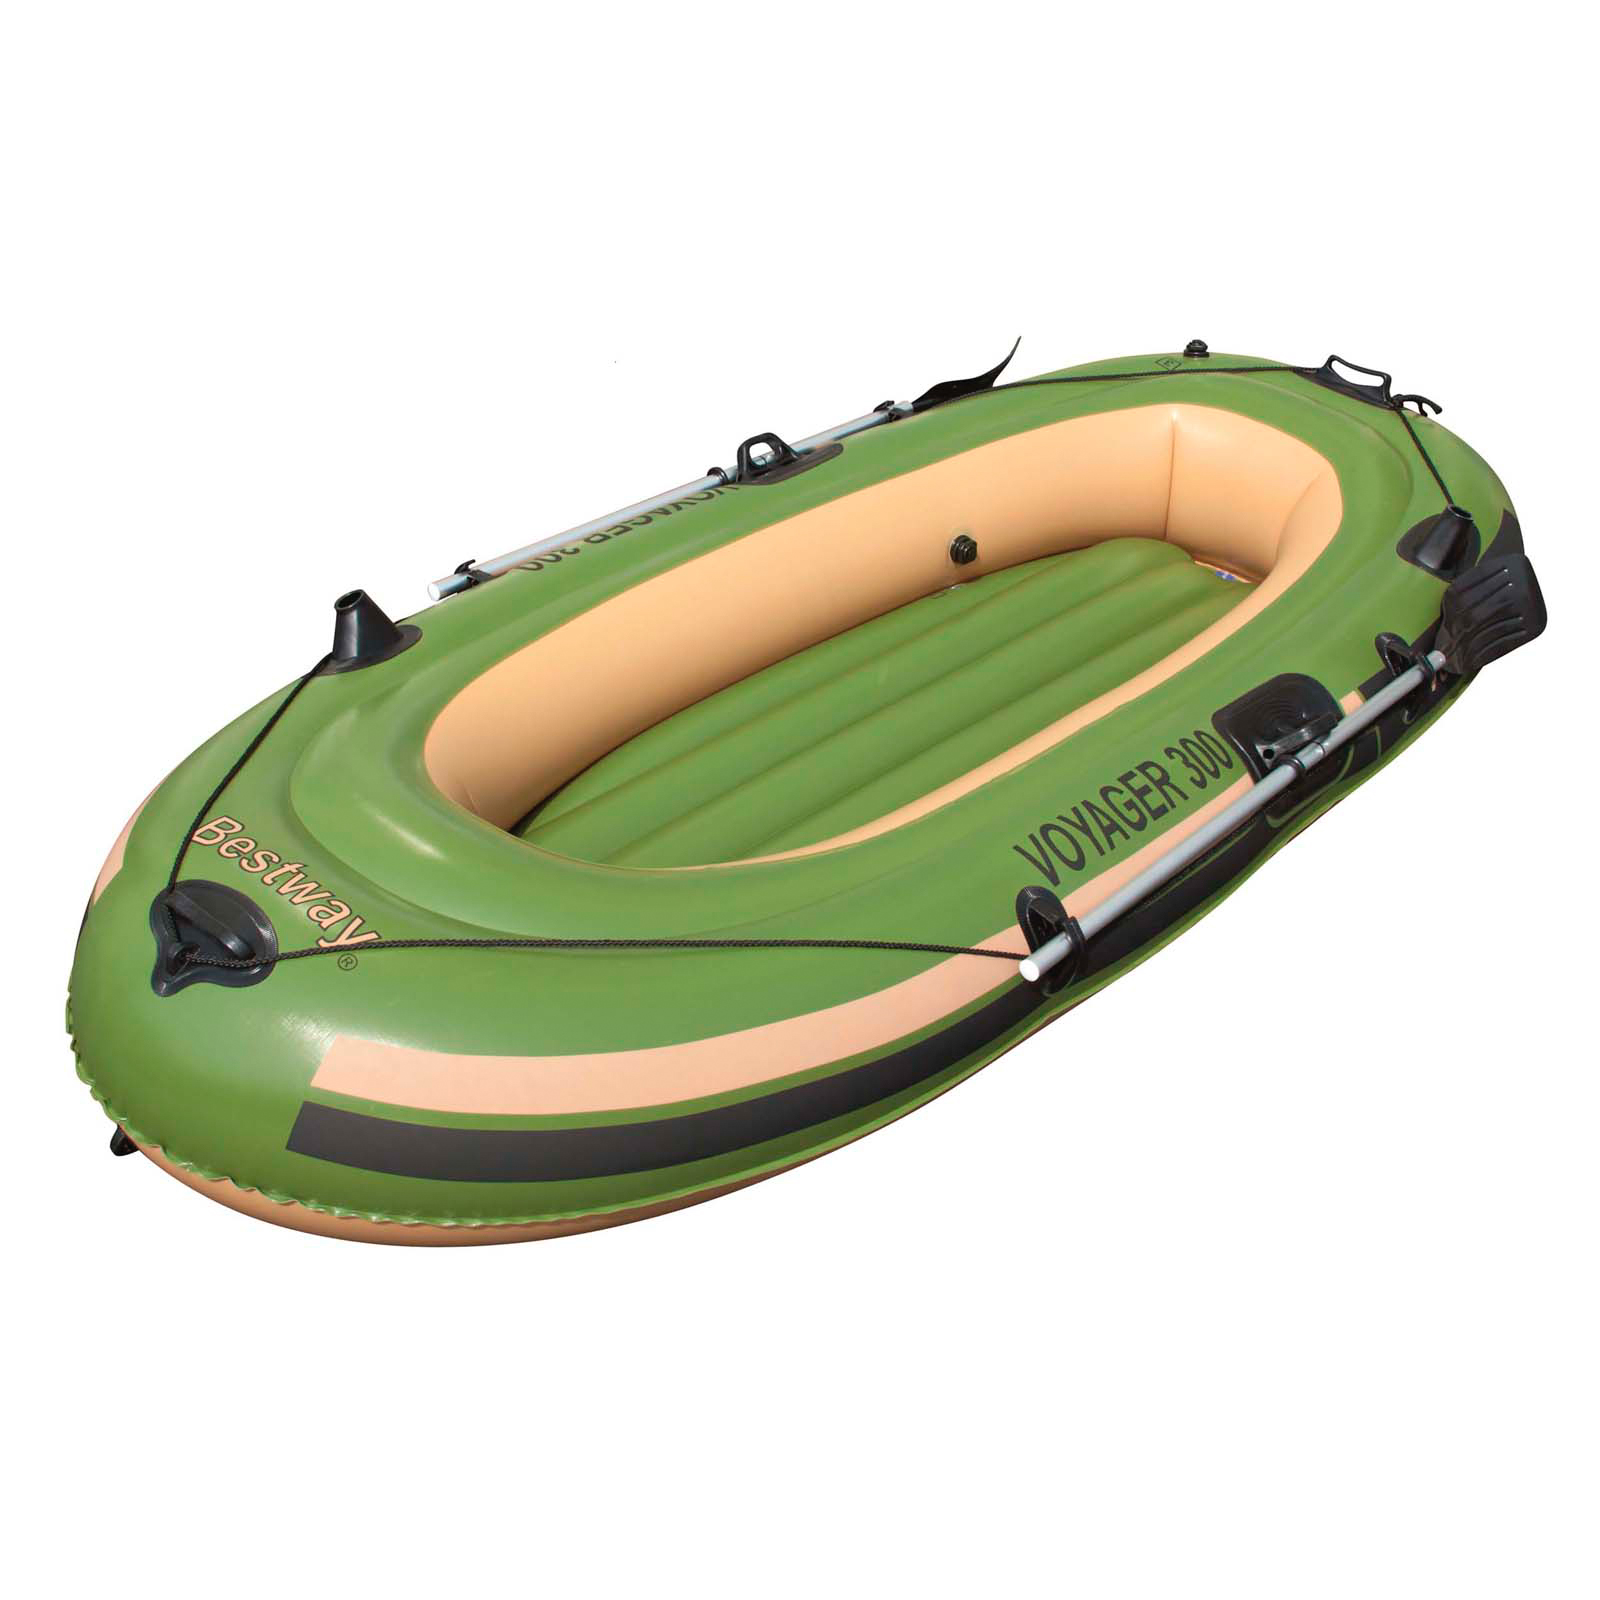 UPC 821808650514 product image for Voyager 300 Boat | upcitemdb.com